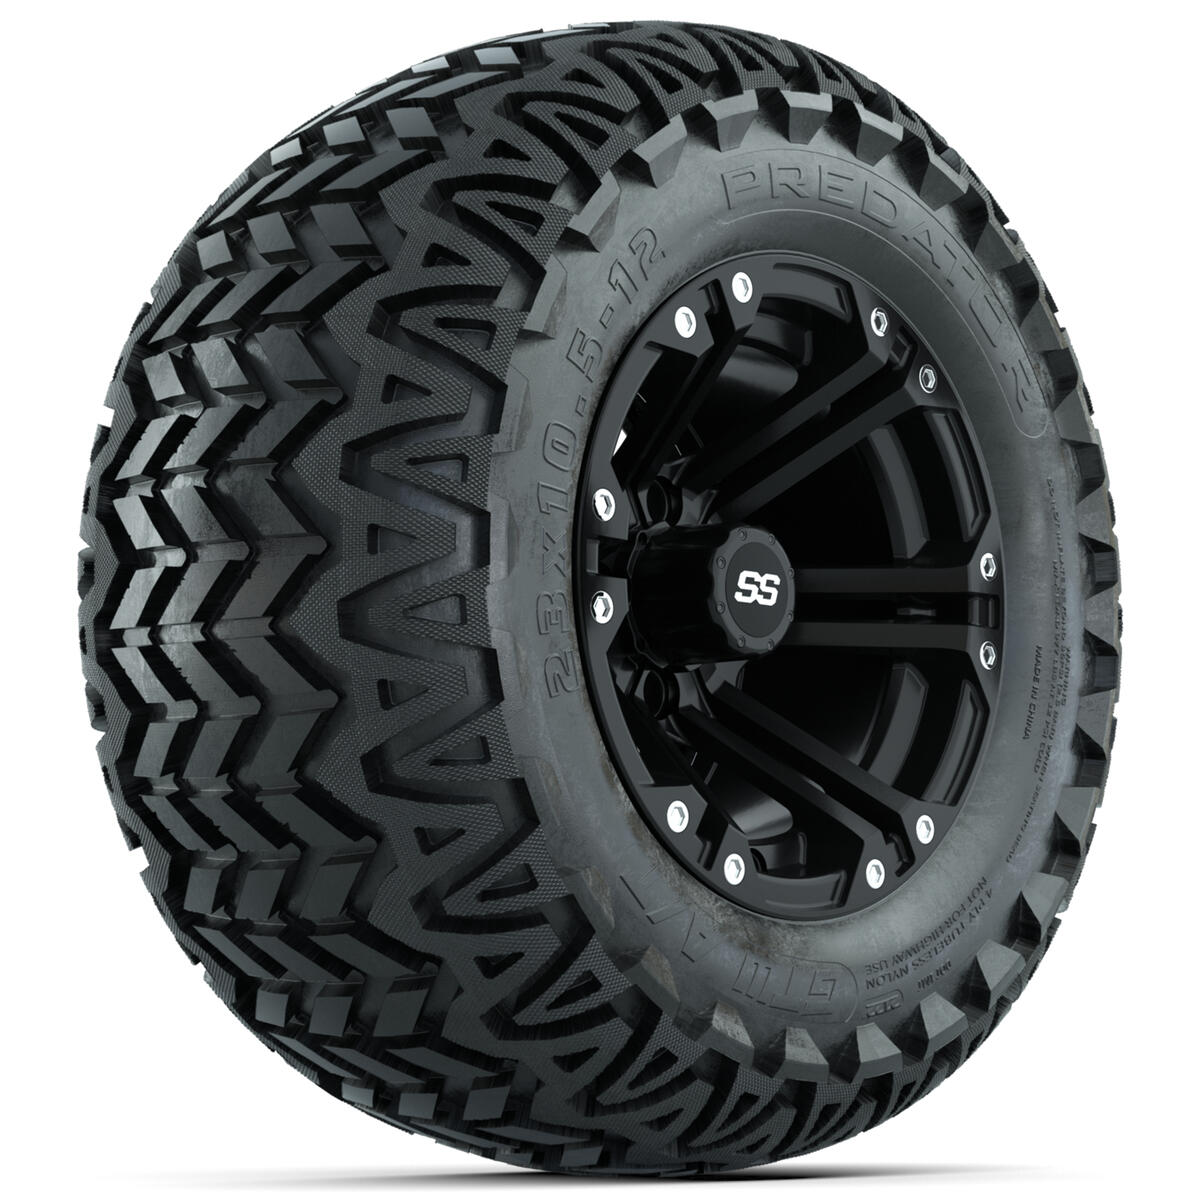 Set of 4 12"in GTW Specter Wheels with 23x10.5-12"GTW Predator All-Terrain Tires A19-667